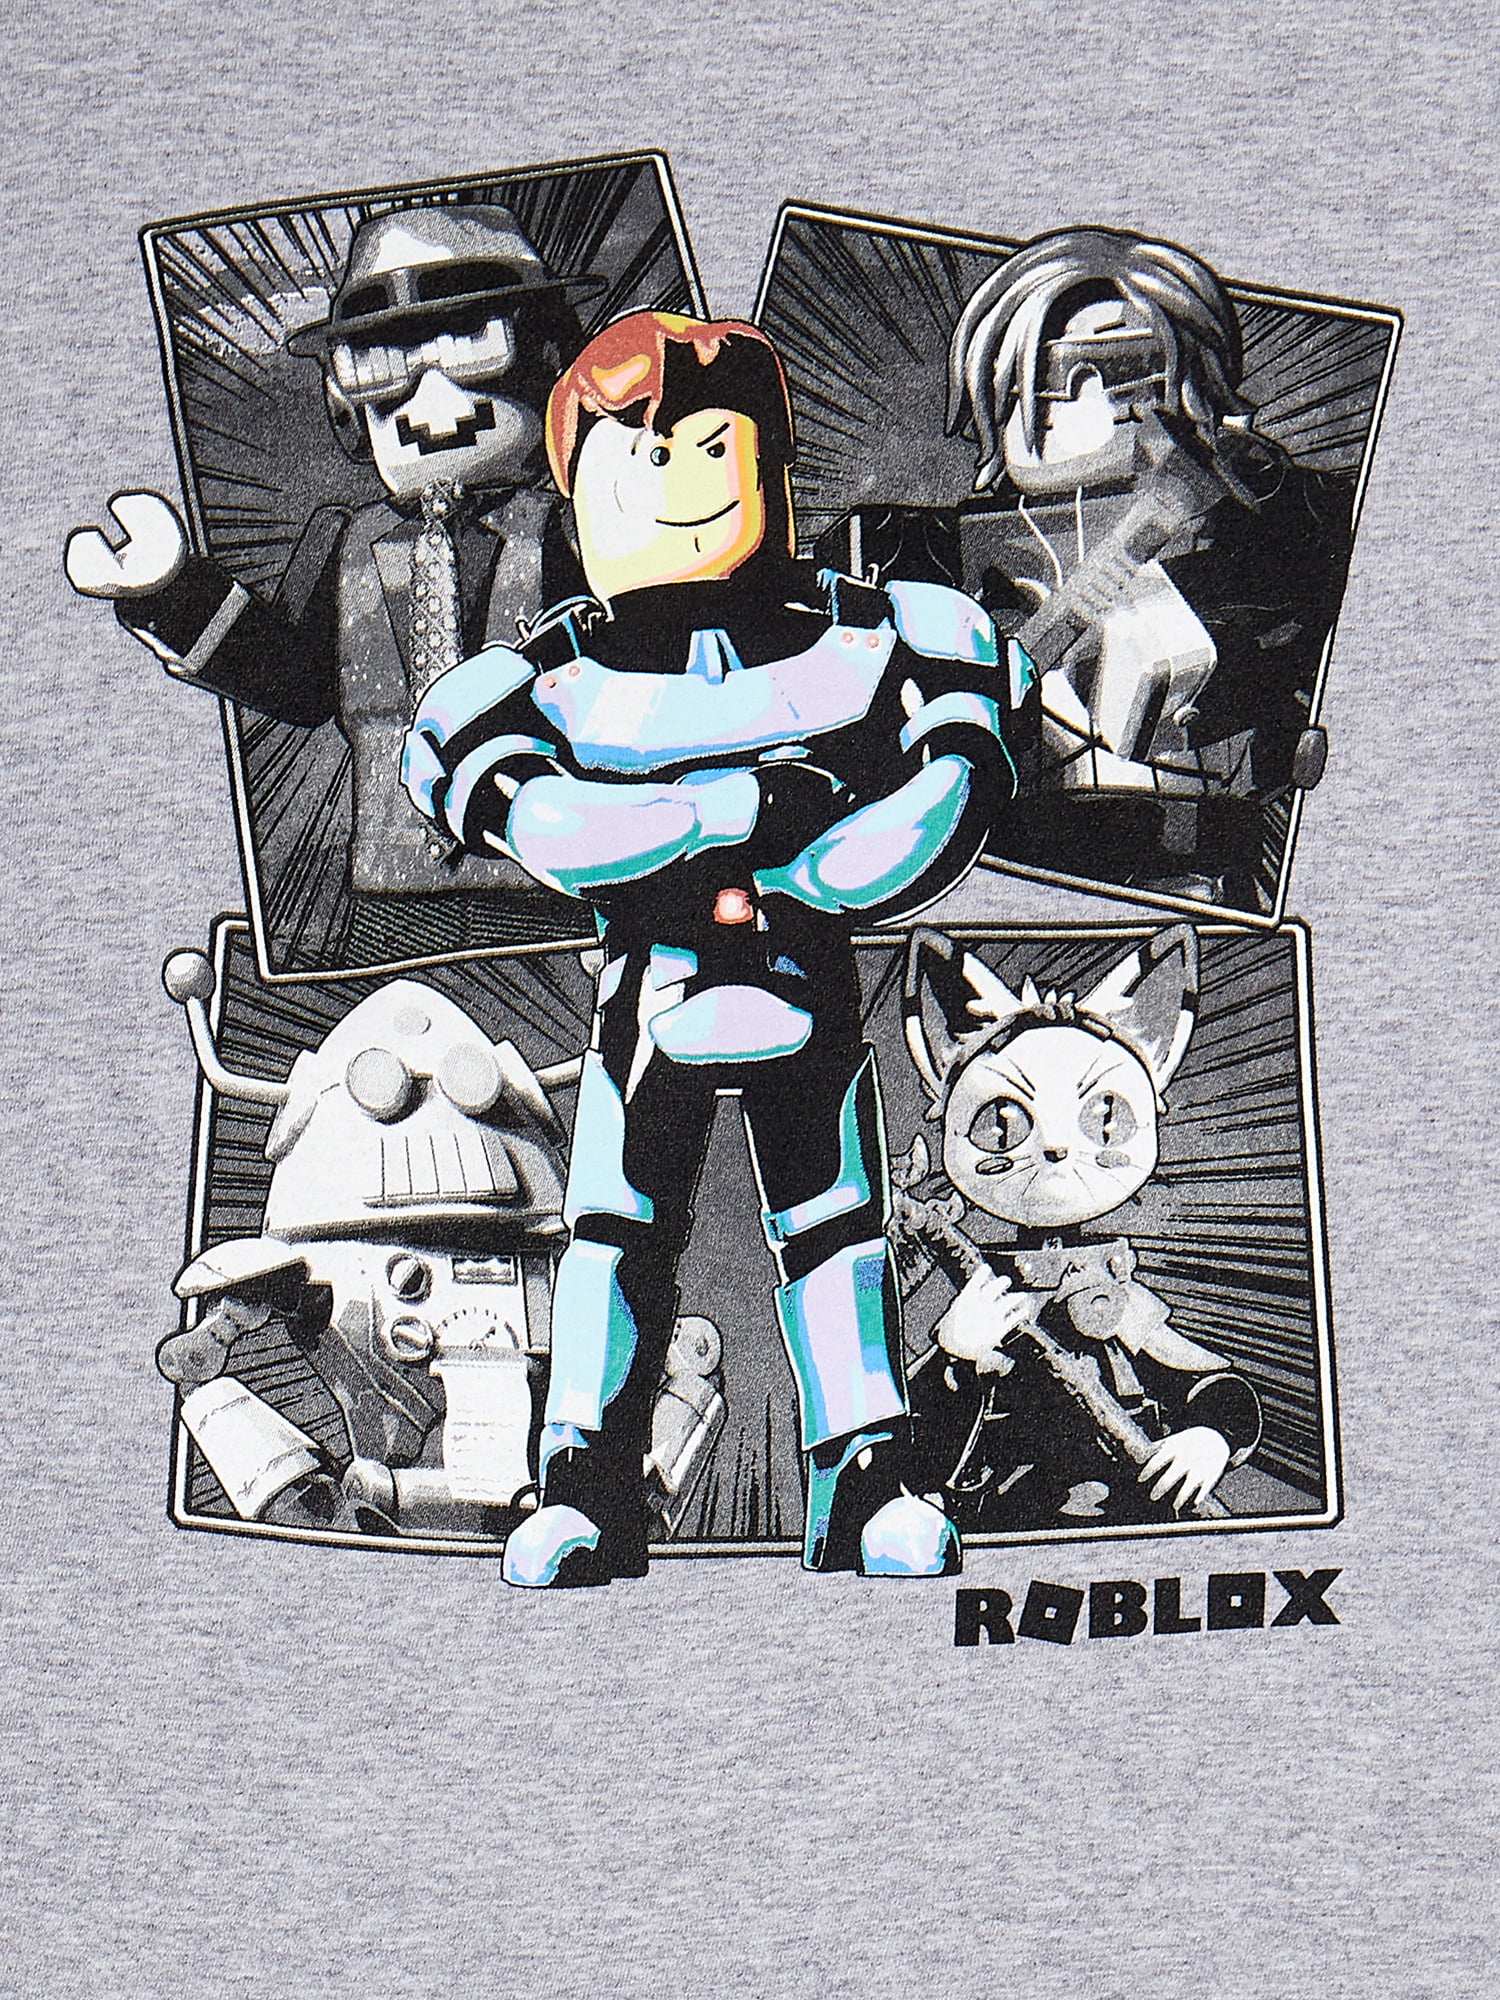 Roblox Boys Short Sleeve Graphic T-Shirts 2 Pack, Size 4-18